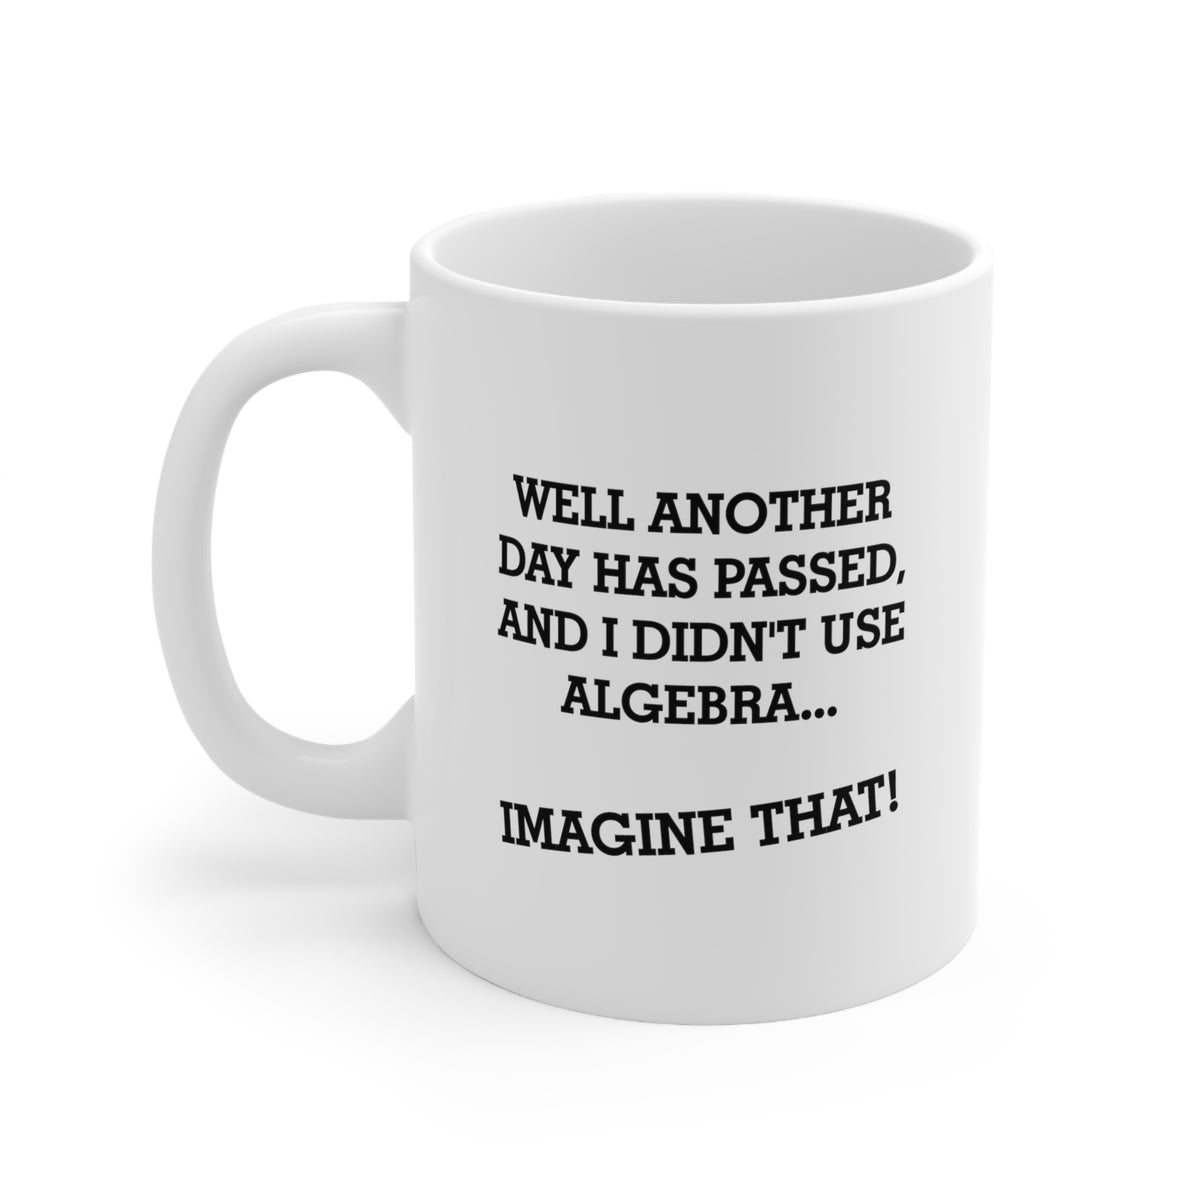 Fun Math Teacher Coffee Mug - Well Another Day Has Passed, And I didn't Use Algebra Cup - Funny Equation Gifts and Sarcasm